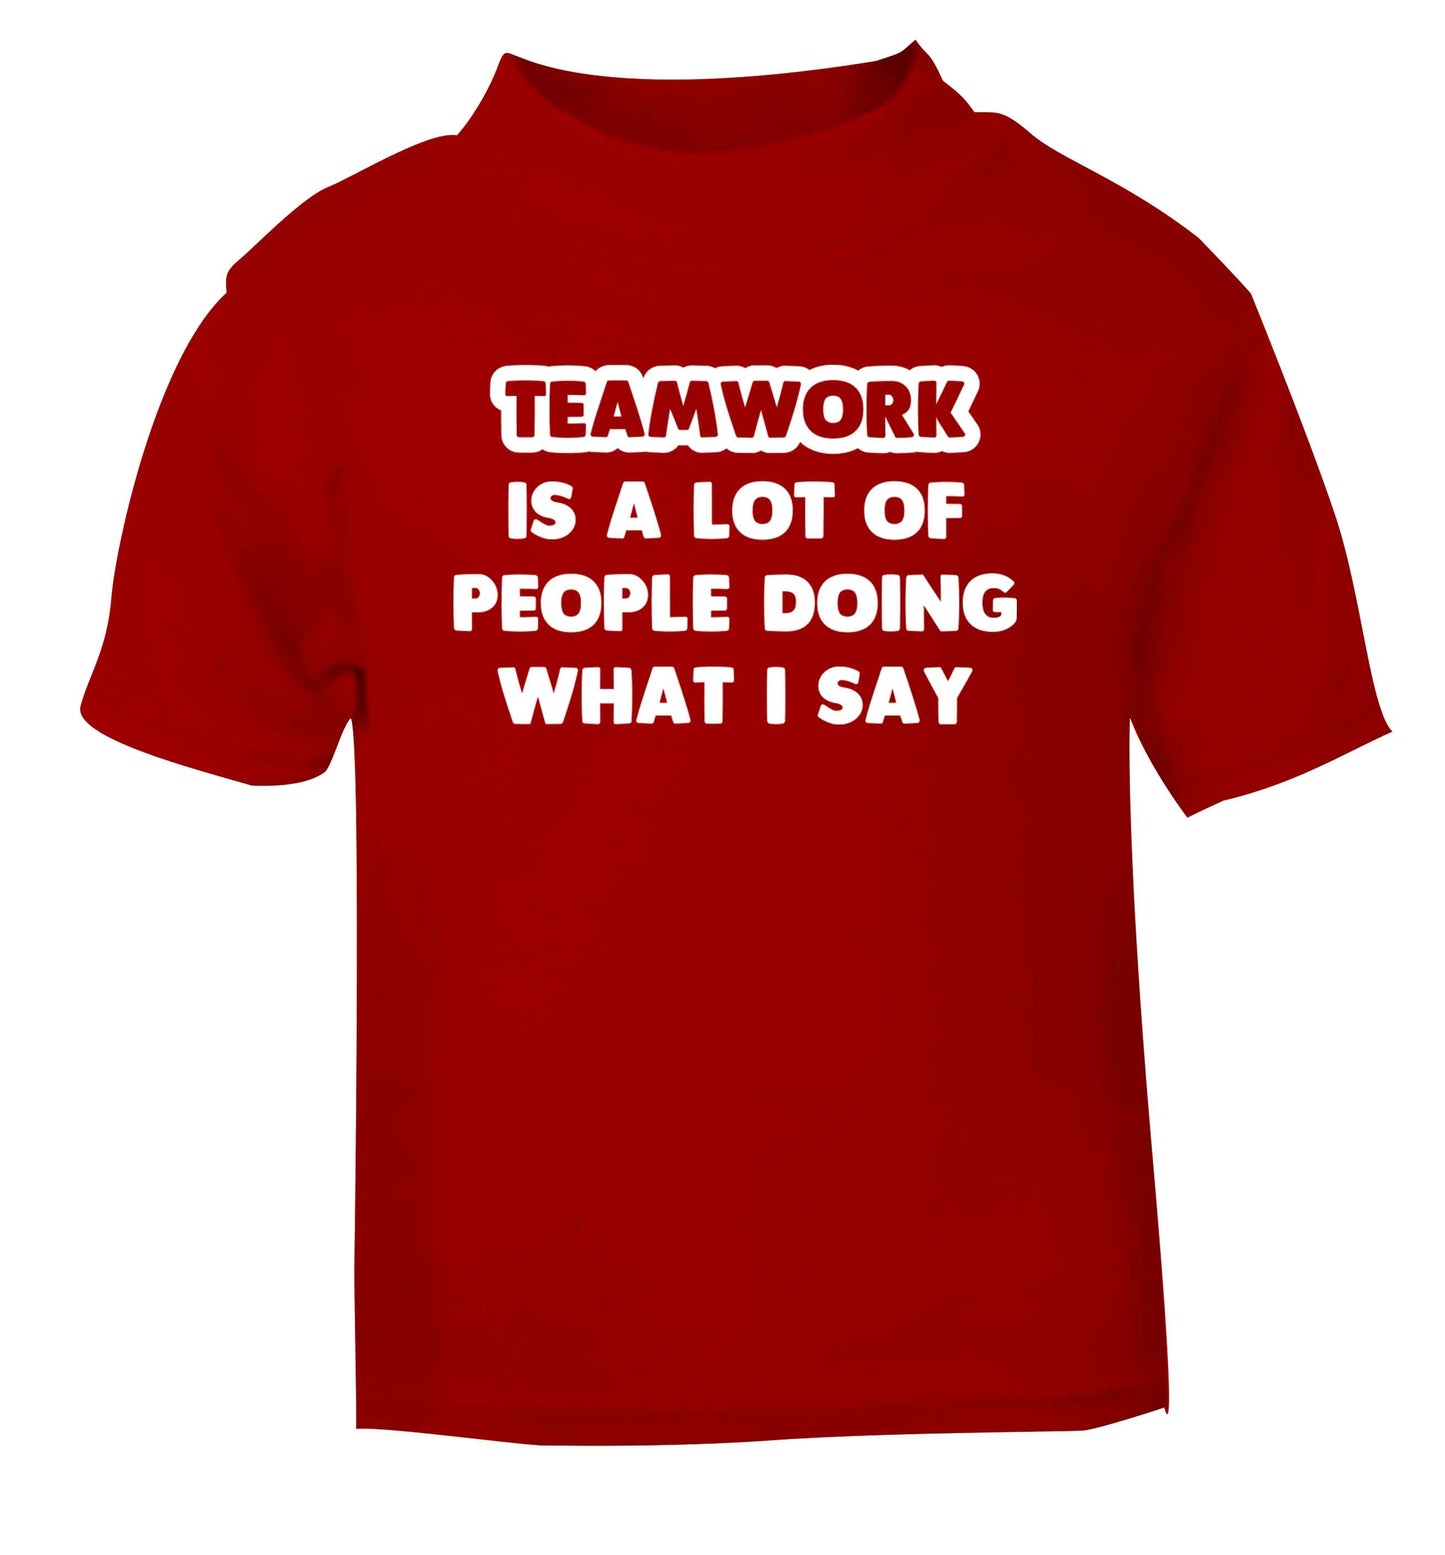 Teamwork is a lot of people doing what I say red Baby Toddler Tshirt 2 Years